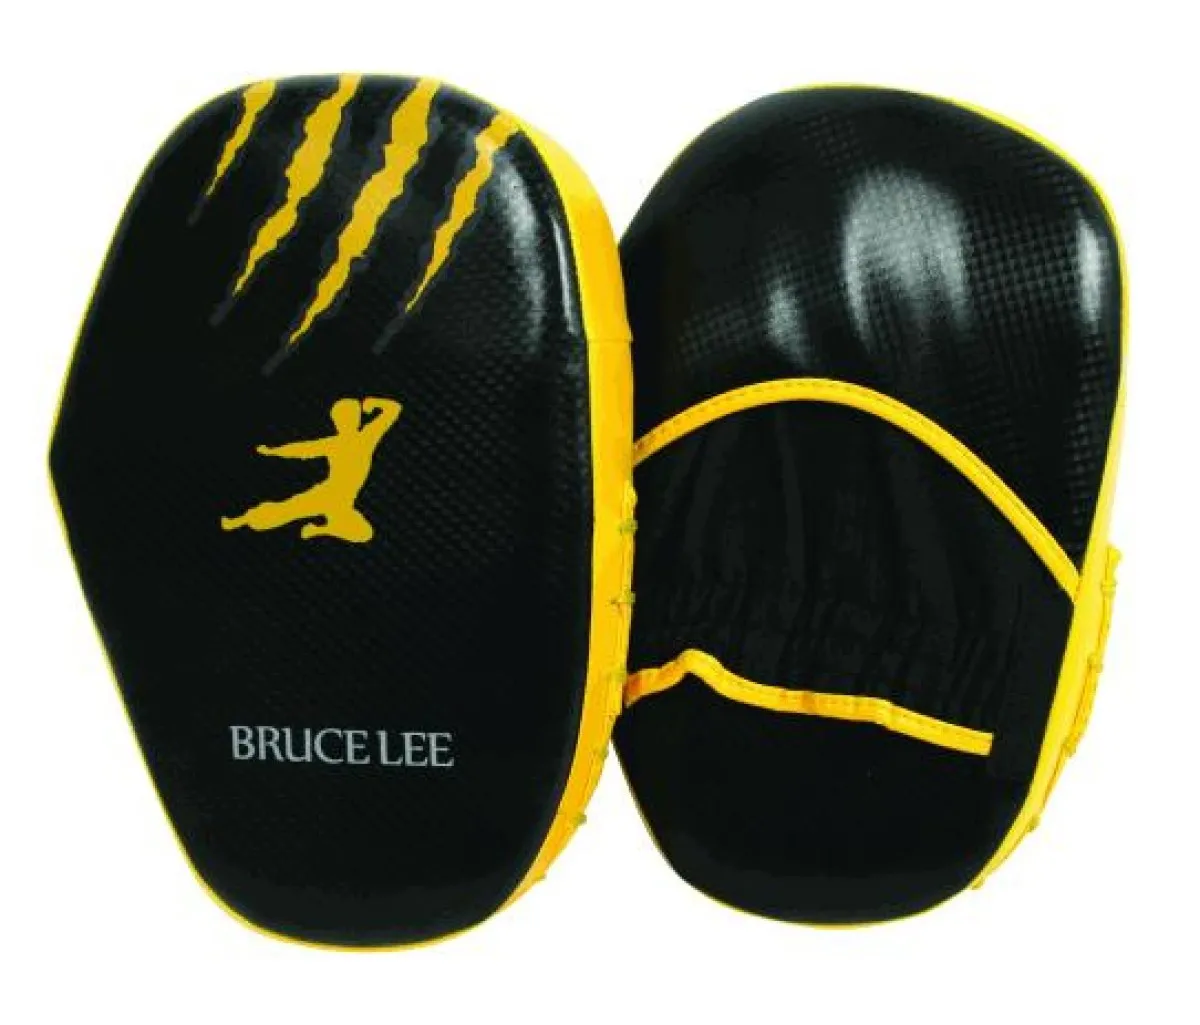 Bruce Lee Signature Hand Claws